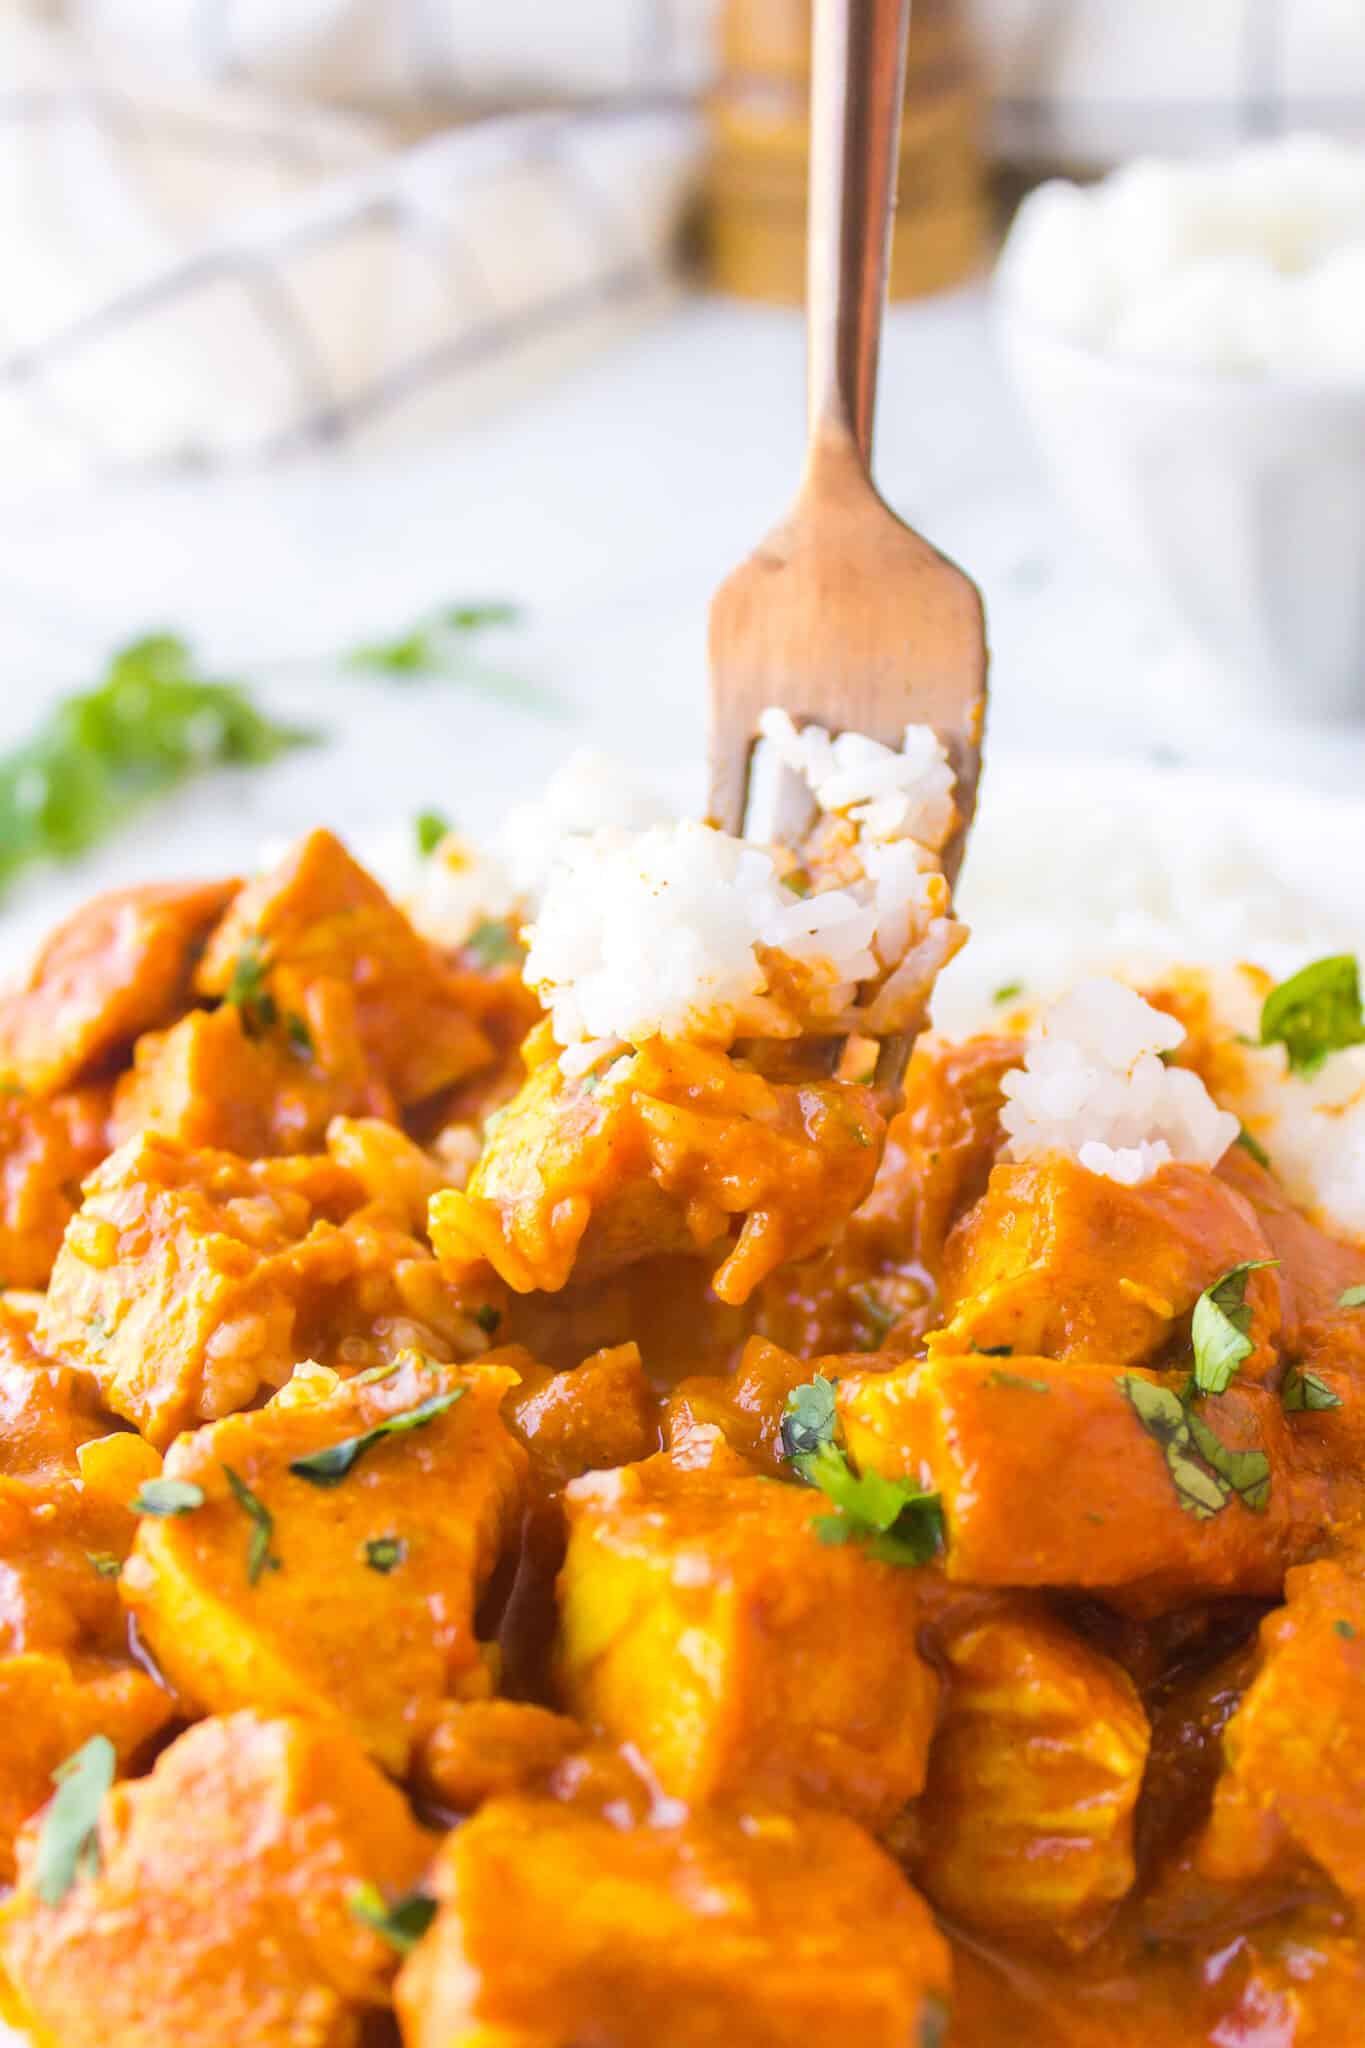 A fork lifting up a bite of chicken curry with white rice.